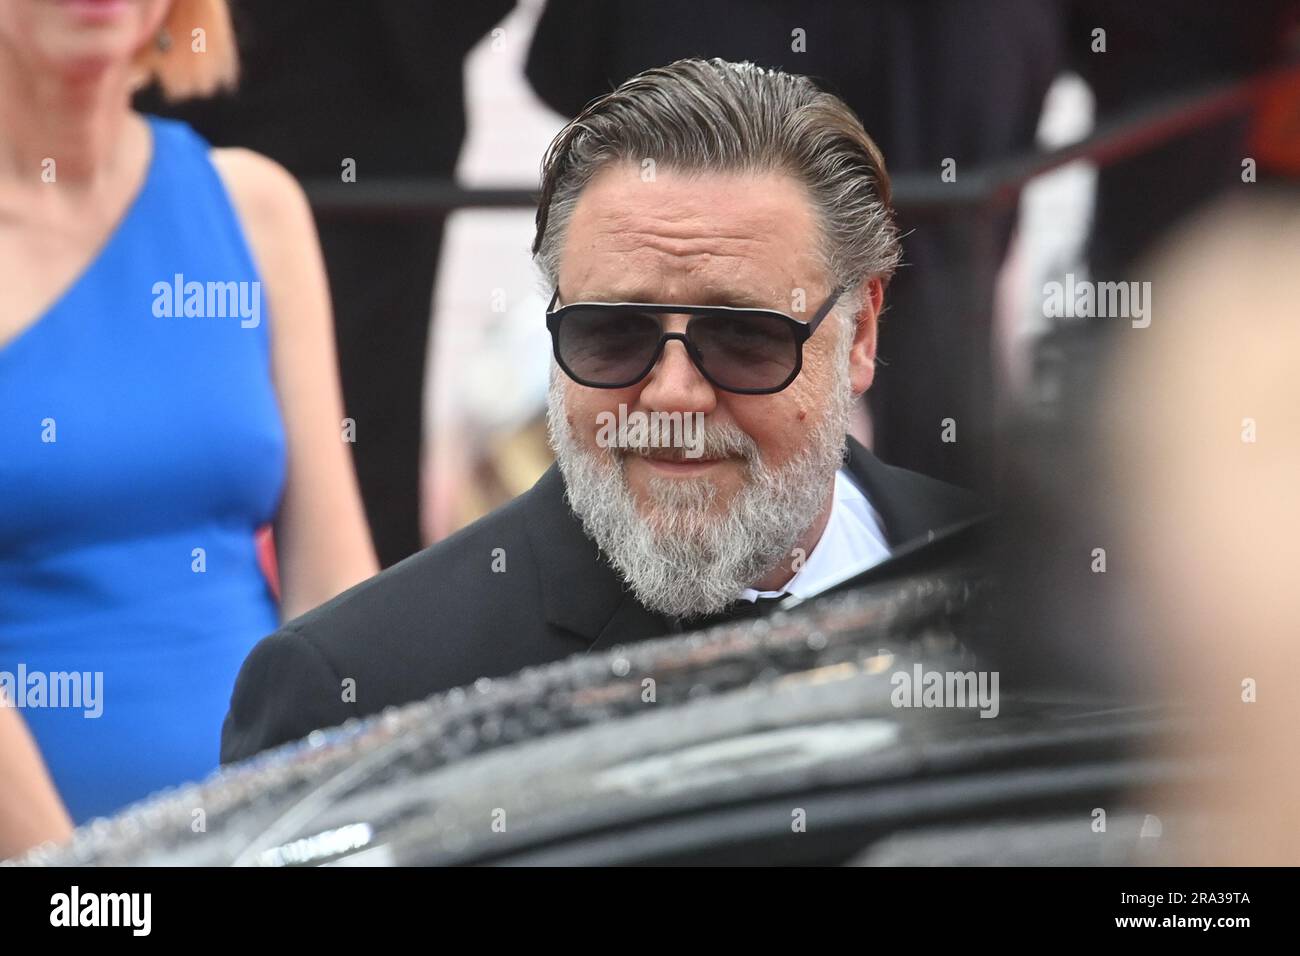 Karlovy Vary, Czech Republic. 30th June, 2023. Actor Russell Crowe arrives at the opening of the 57th Karlovy Vary International Film Festival (KVIFF), on June 30, 2023, in Karlovy Vary, Czech Republic. Credit: Slavomir Kubes/CTK Photo/Alamy Live News Stock Photo